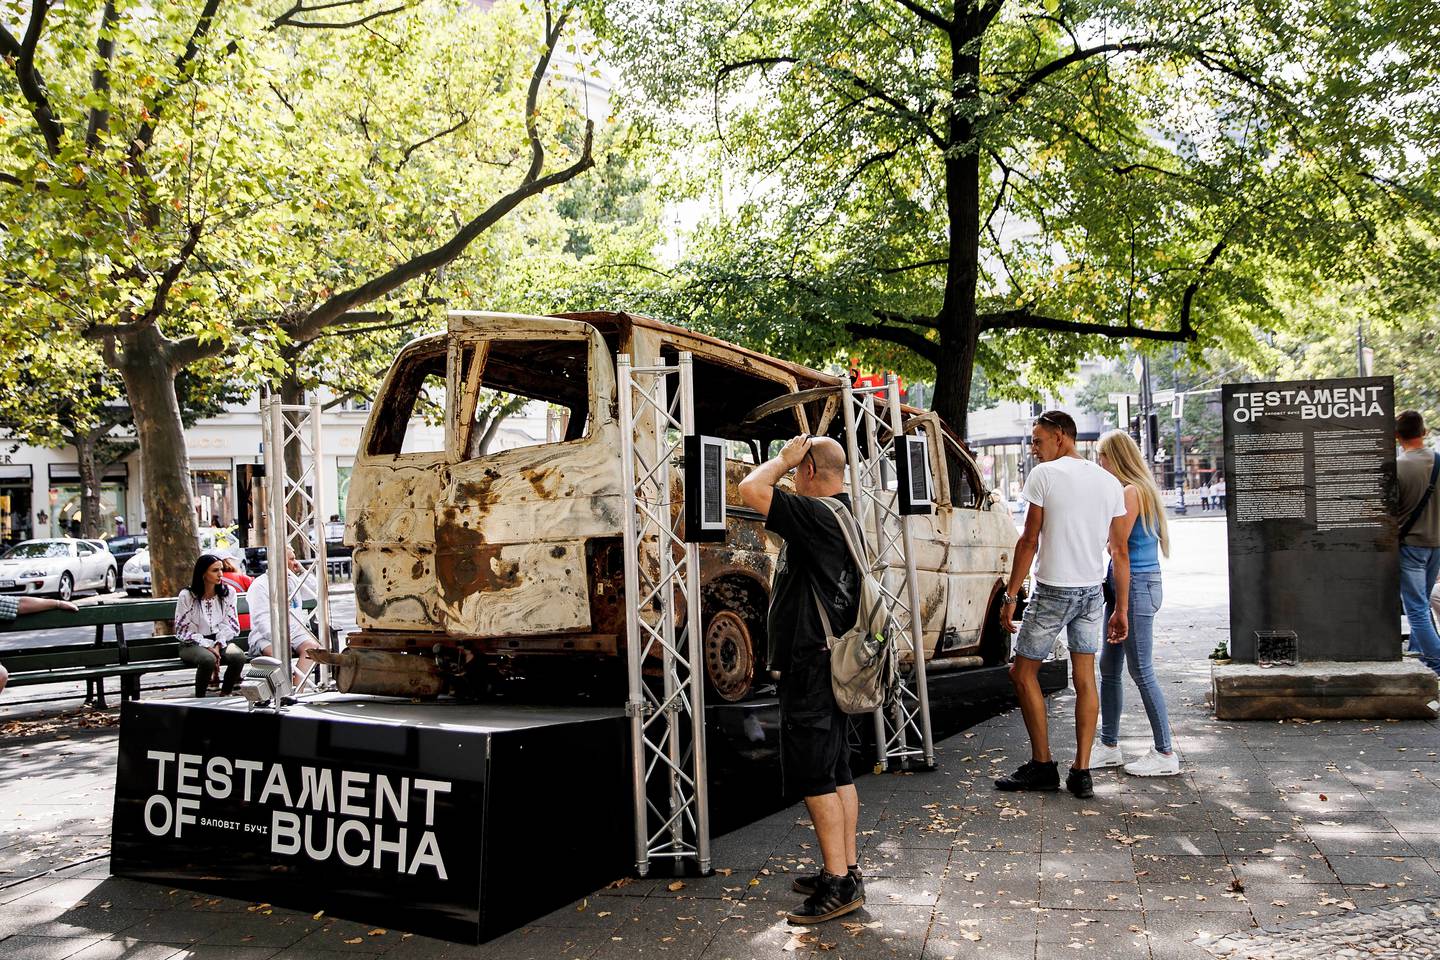 Passers-by in front of the "Testament of Bucha" exhibition in Berlin, on August 24, Ukraine's Independence Day and the six month mark since the beginning of the war. The wrecked car is one in which four fleeing Ukrainian women were shot at by the Russian military and died. Getty 